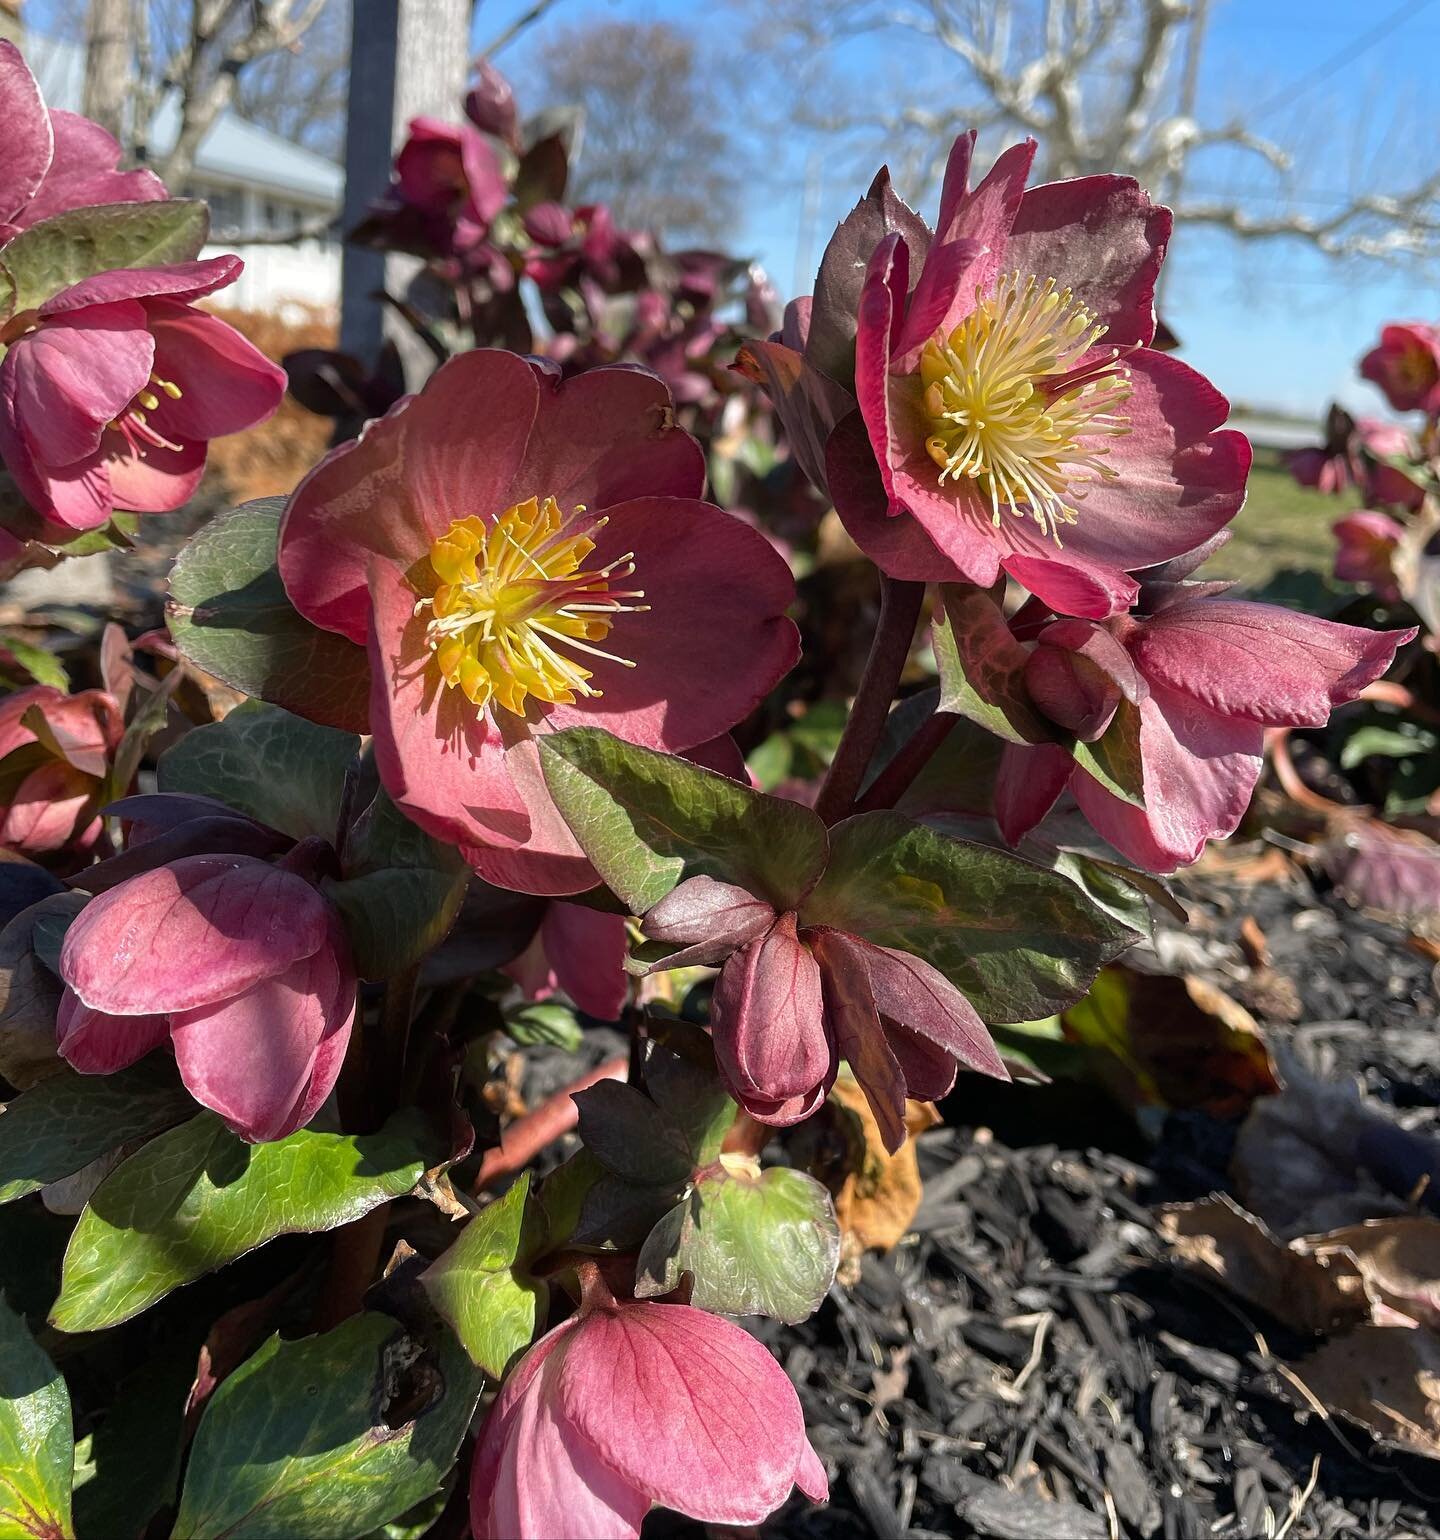 Hellebore and hella-blooms at A Milkhouse Party promise a year of beautiful events for 2023.  #booktoday #milkhouse #flowers #blooms #hellebore #blooms #spring23